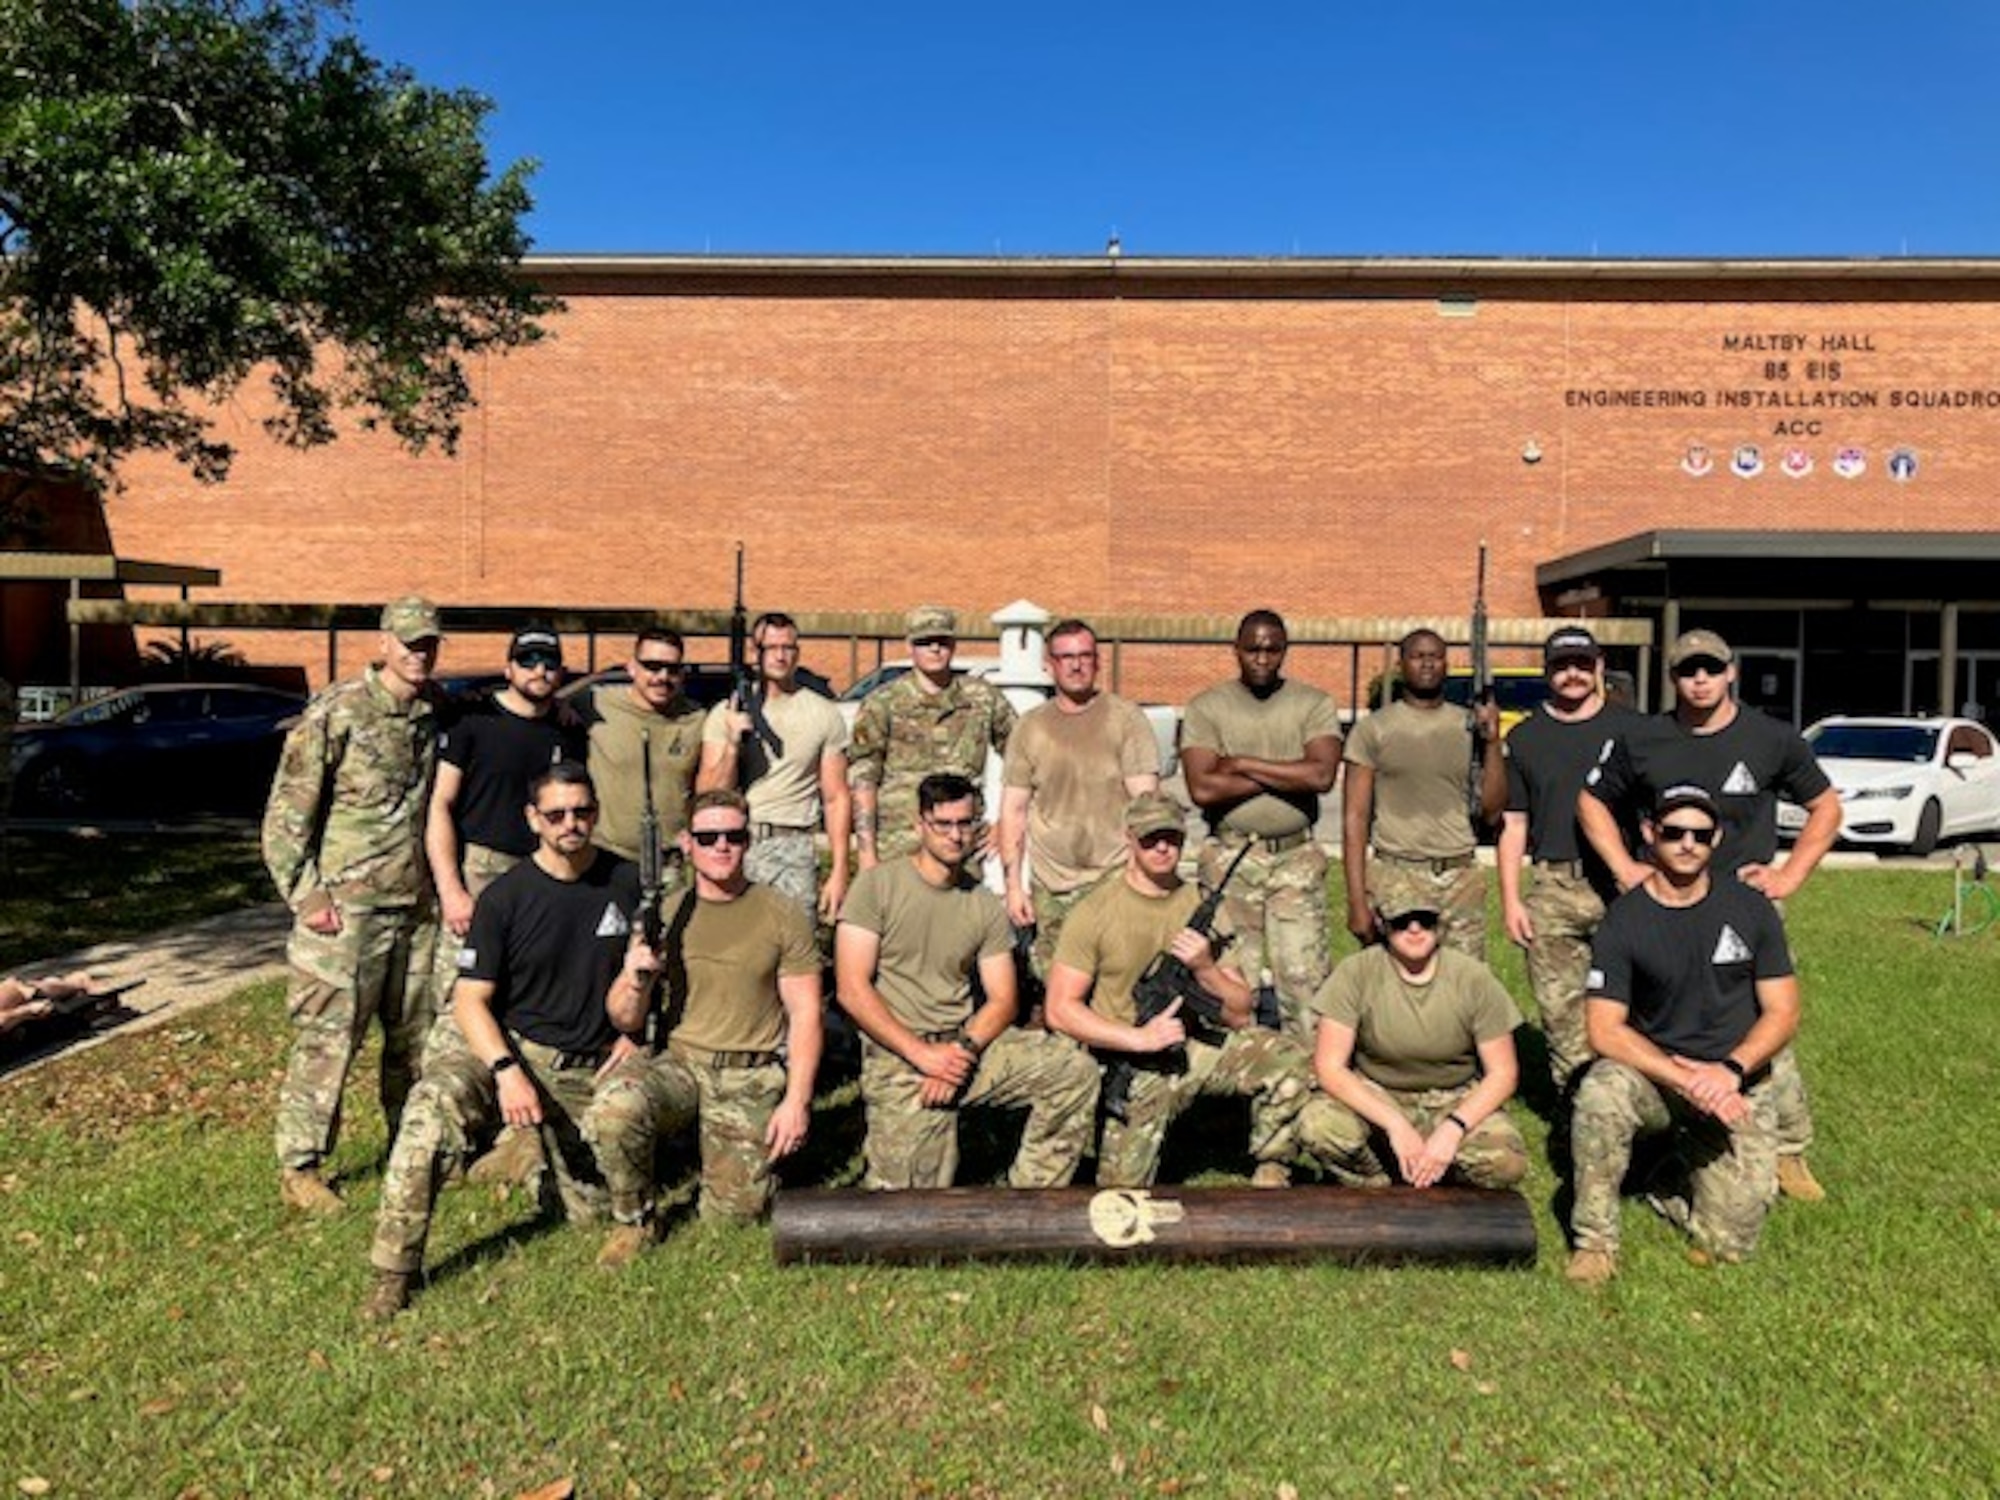 Courtesy photo of members from the 85th Engineering Installation Squadron and the 5th Combat Communications Support Squadron posing for photo in the first combat readiness course at Keesler, on April 14, 2023. In this course 85th EIS students learn weapons familiarization, combatives and other pre-deployment tactics. (Courtesy photo)